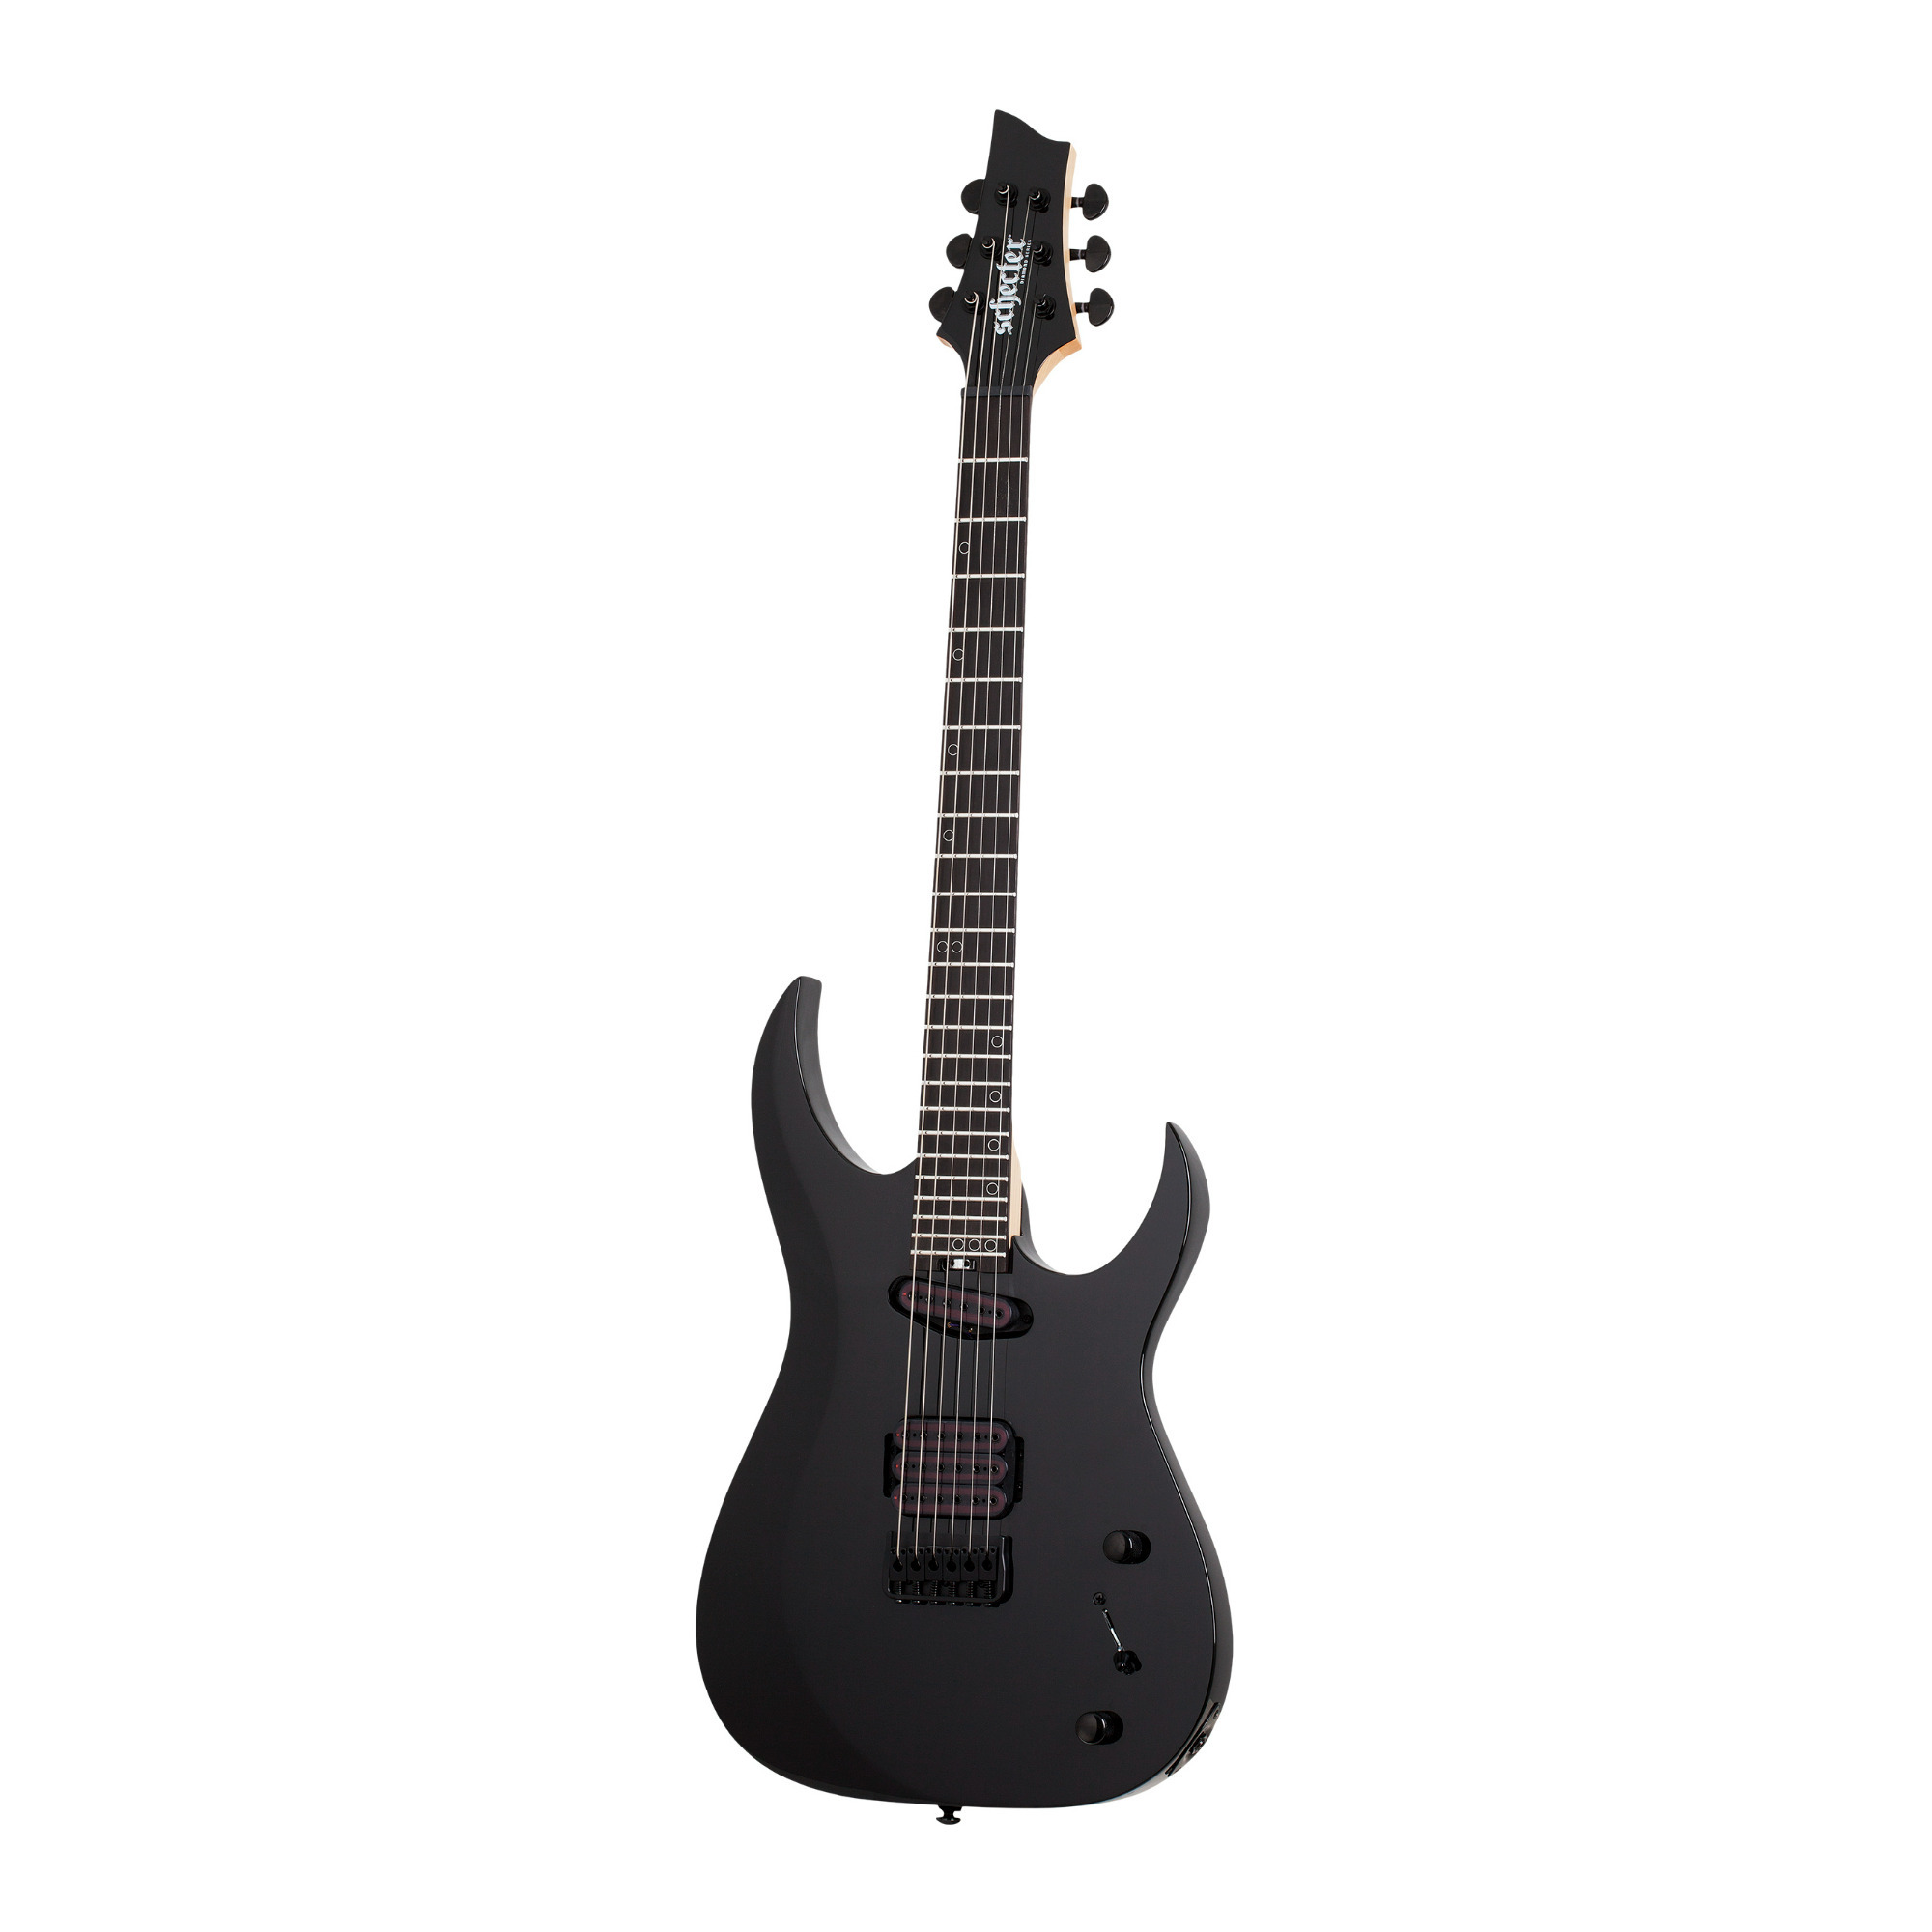 Schecter Sunset-6 Triad 6-String Electric Guitar with Ebony Fretboard (Right-Handed, Gloss Black) -  SGR-2574